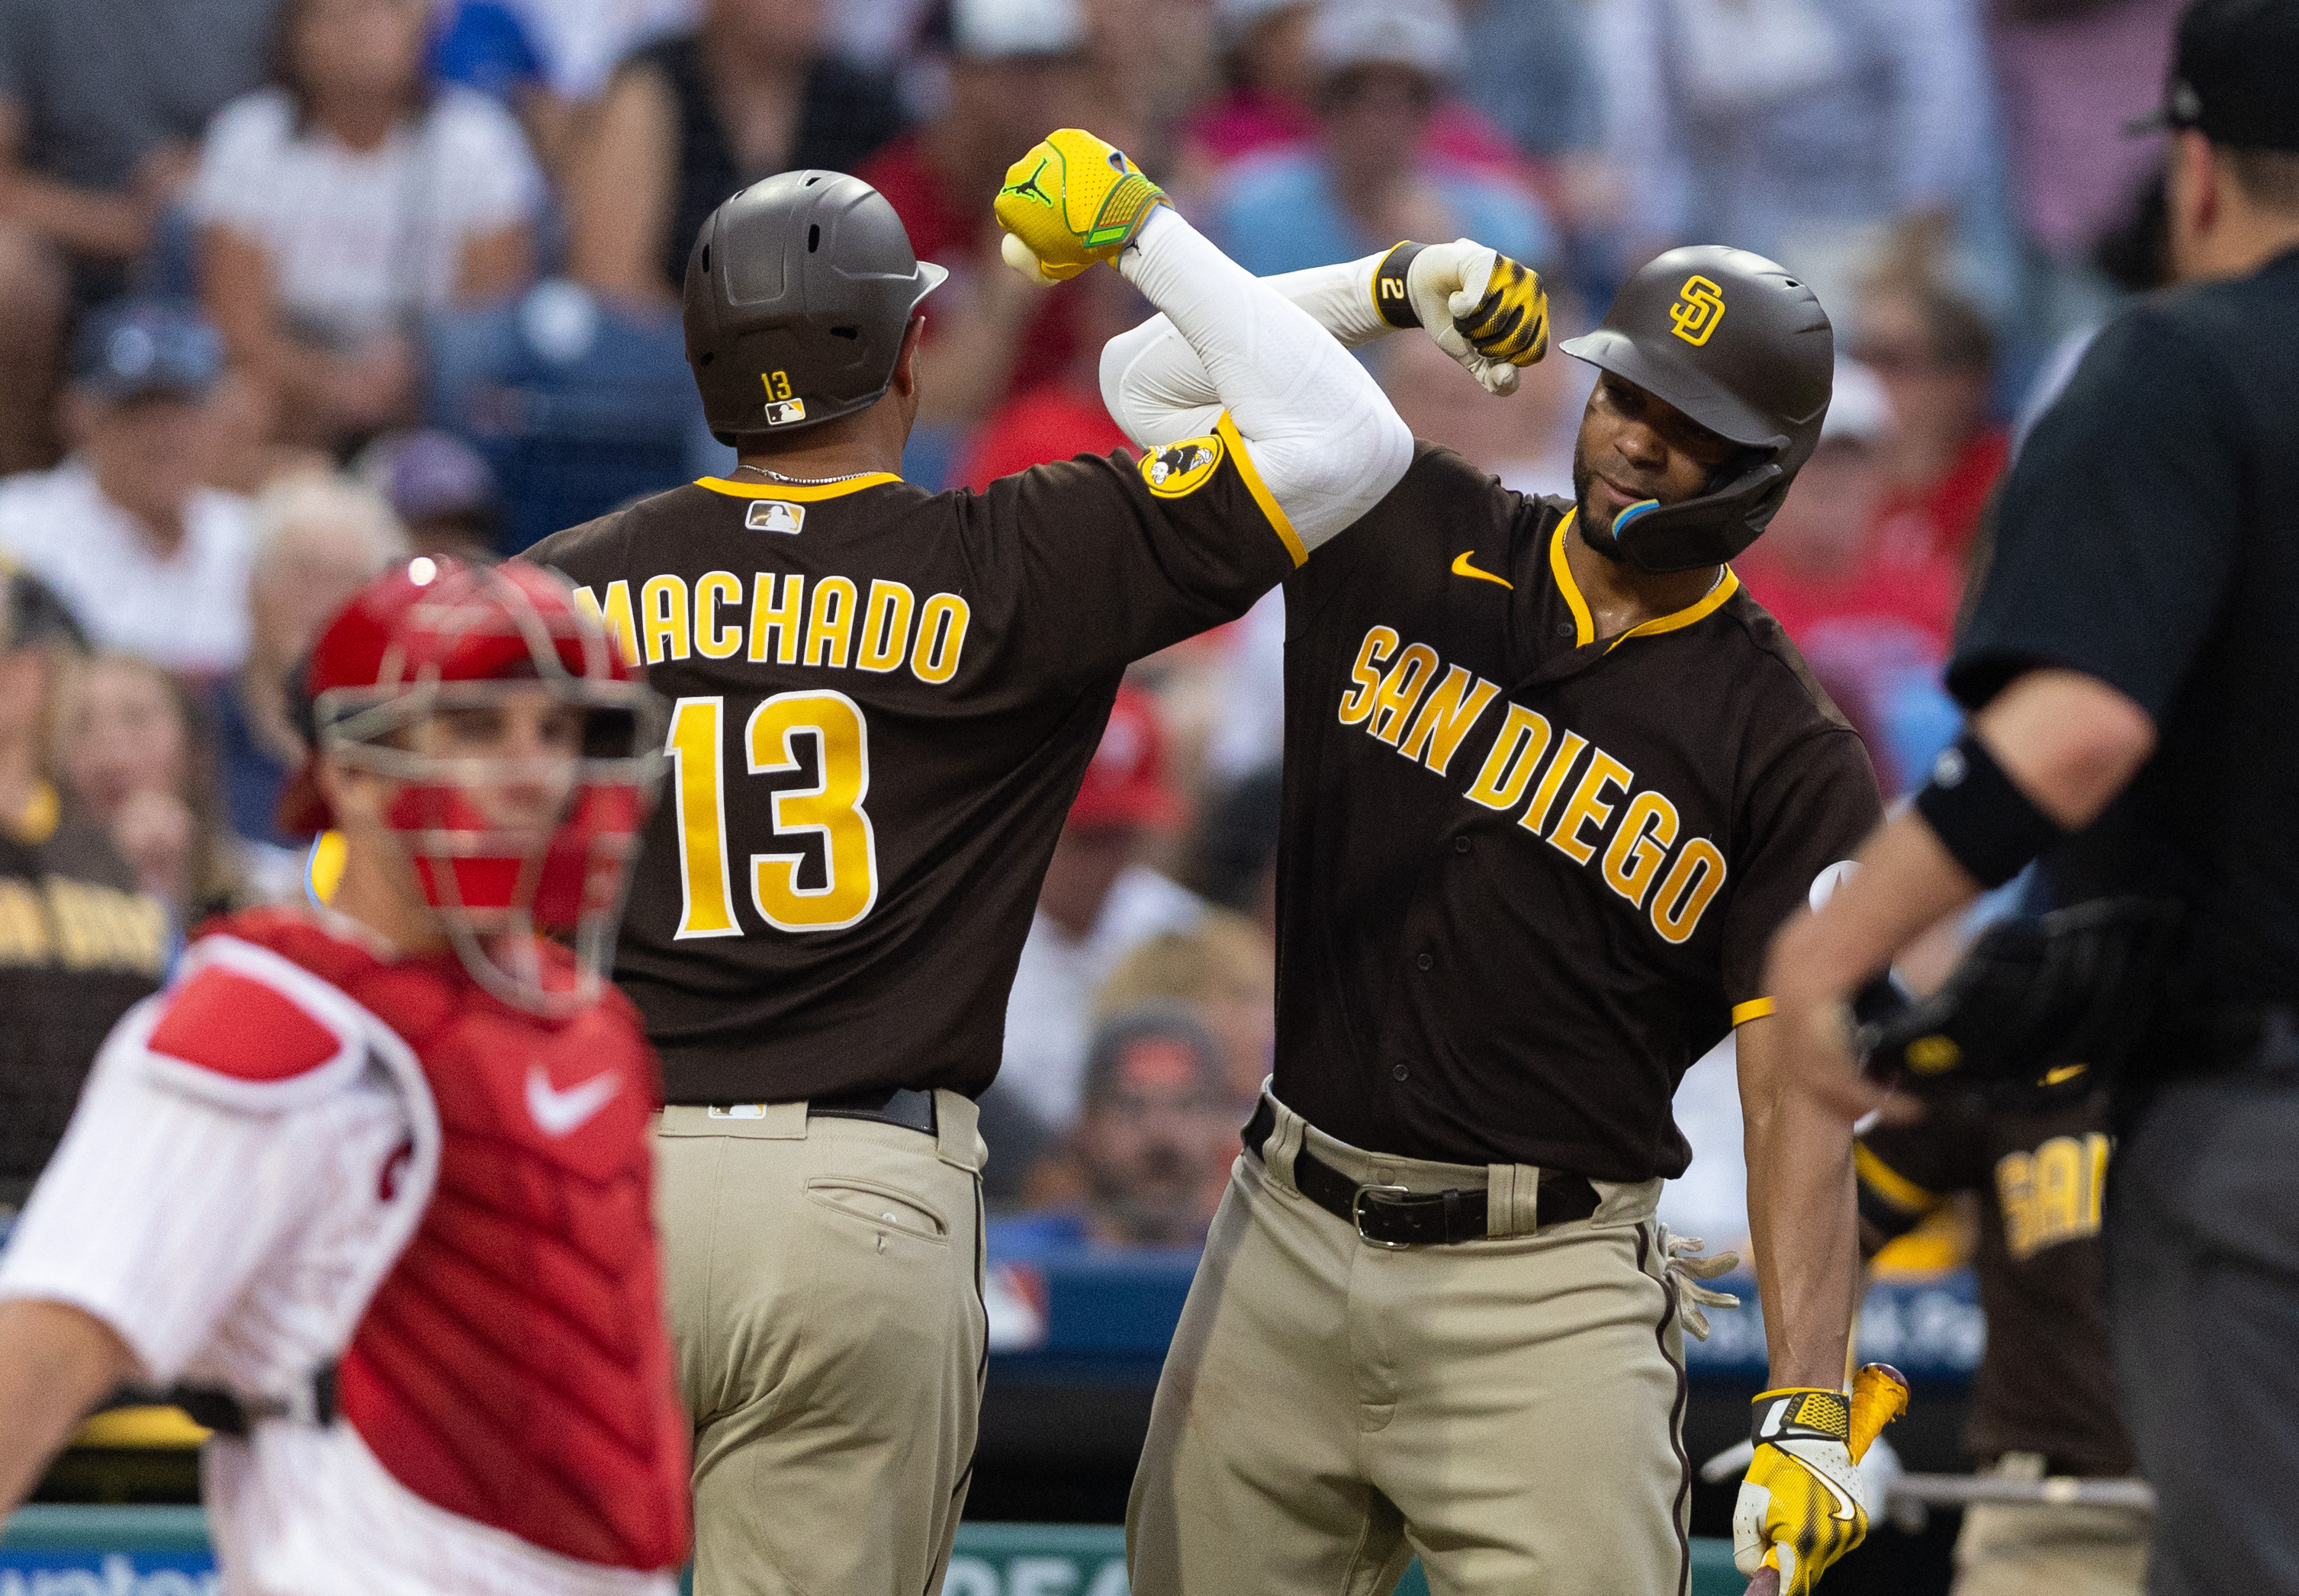 Padres sock four homers, roll past Phillies